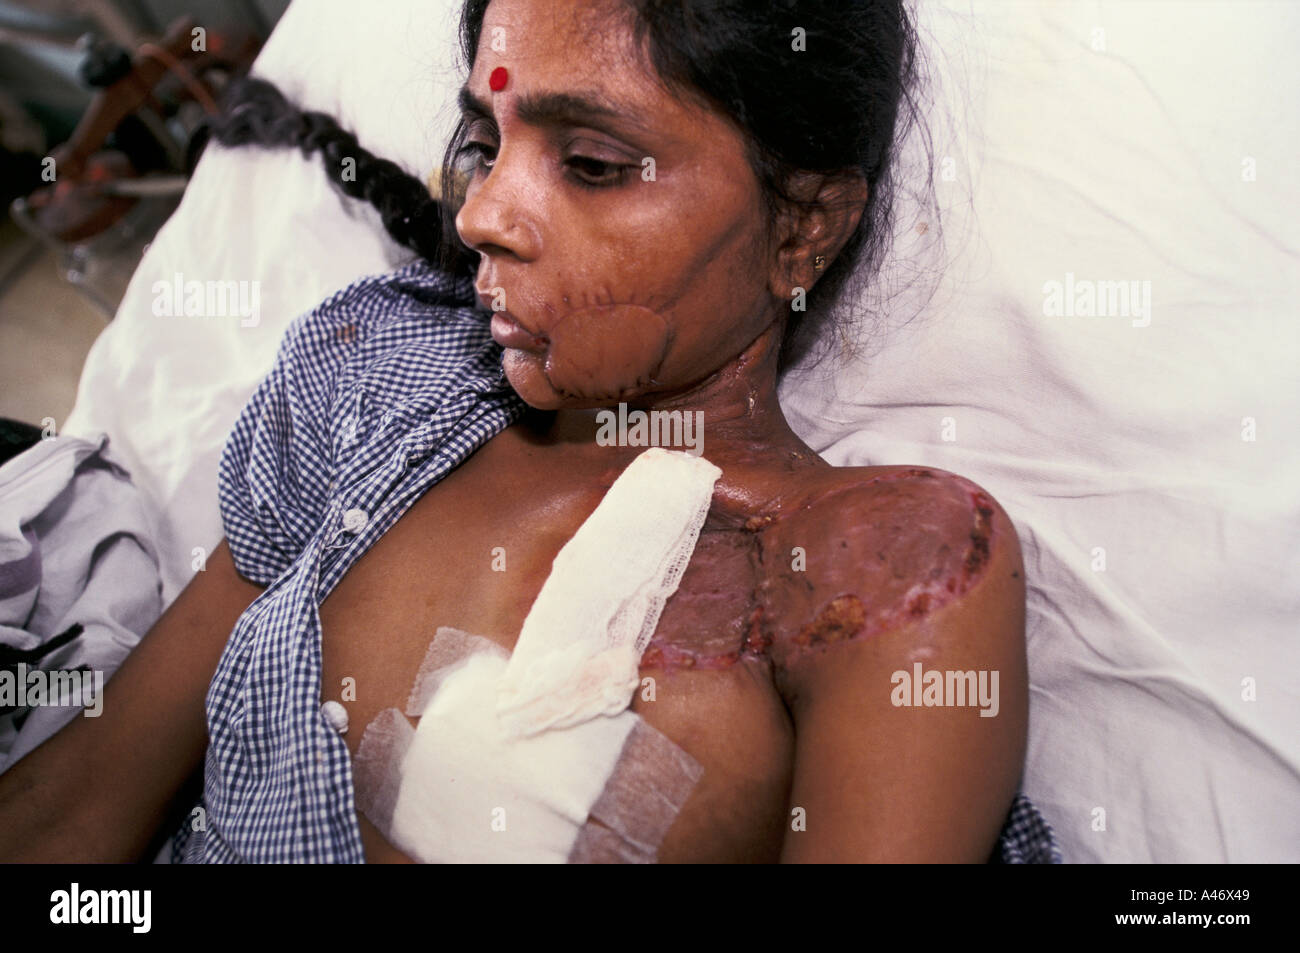 Woman in hospital bed after re-constructive plastic surgery for facial cancer Mumbai (Bombay) India Stock Photo